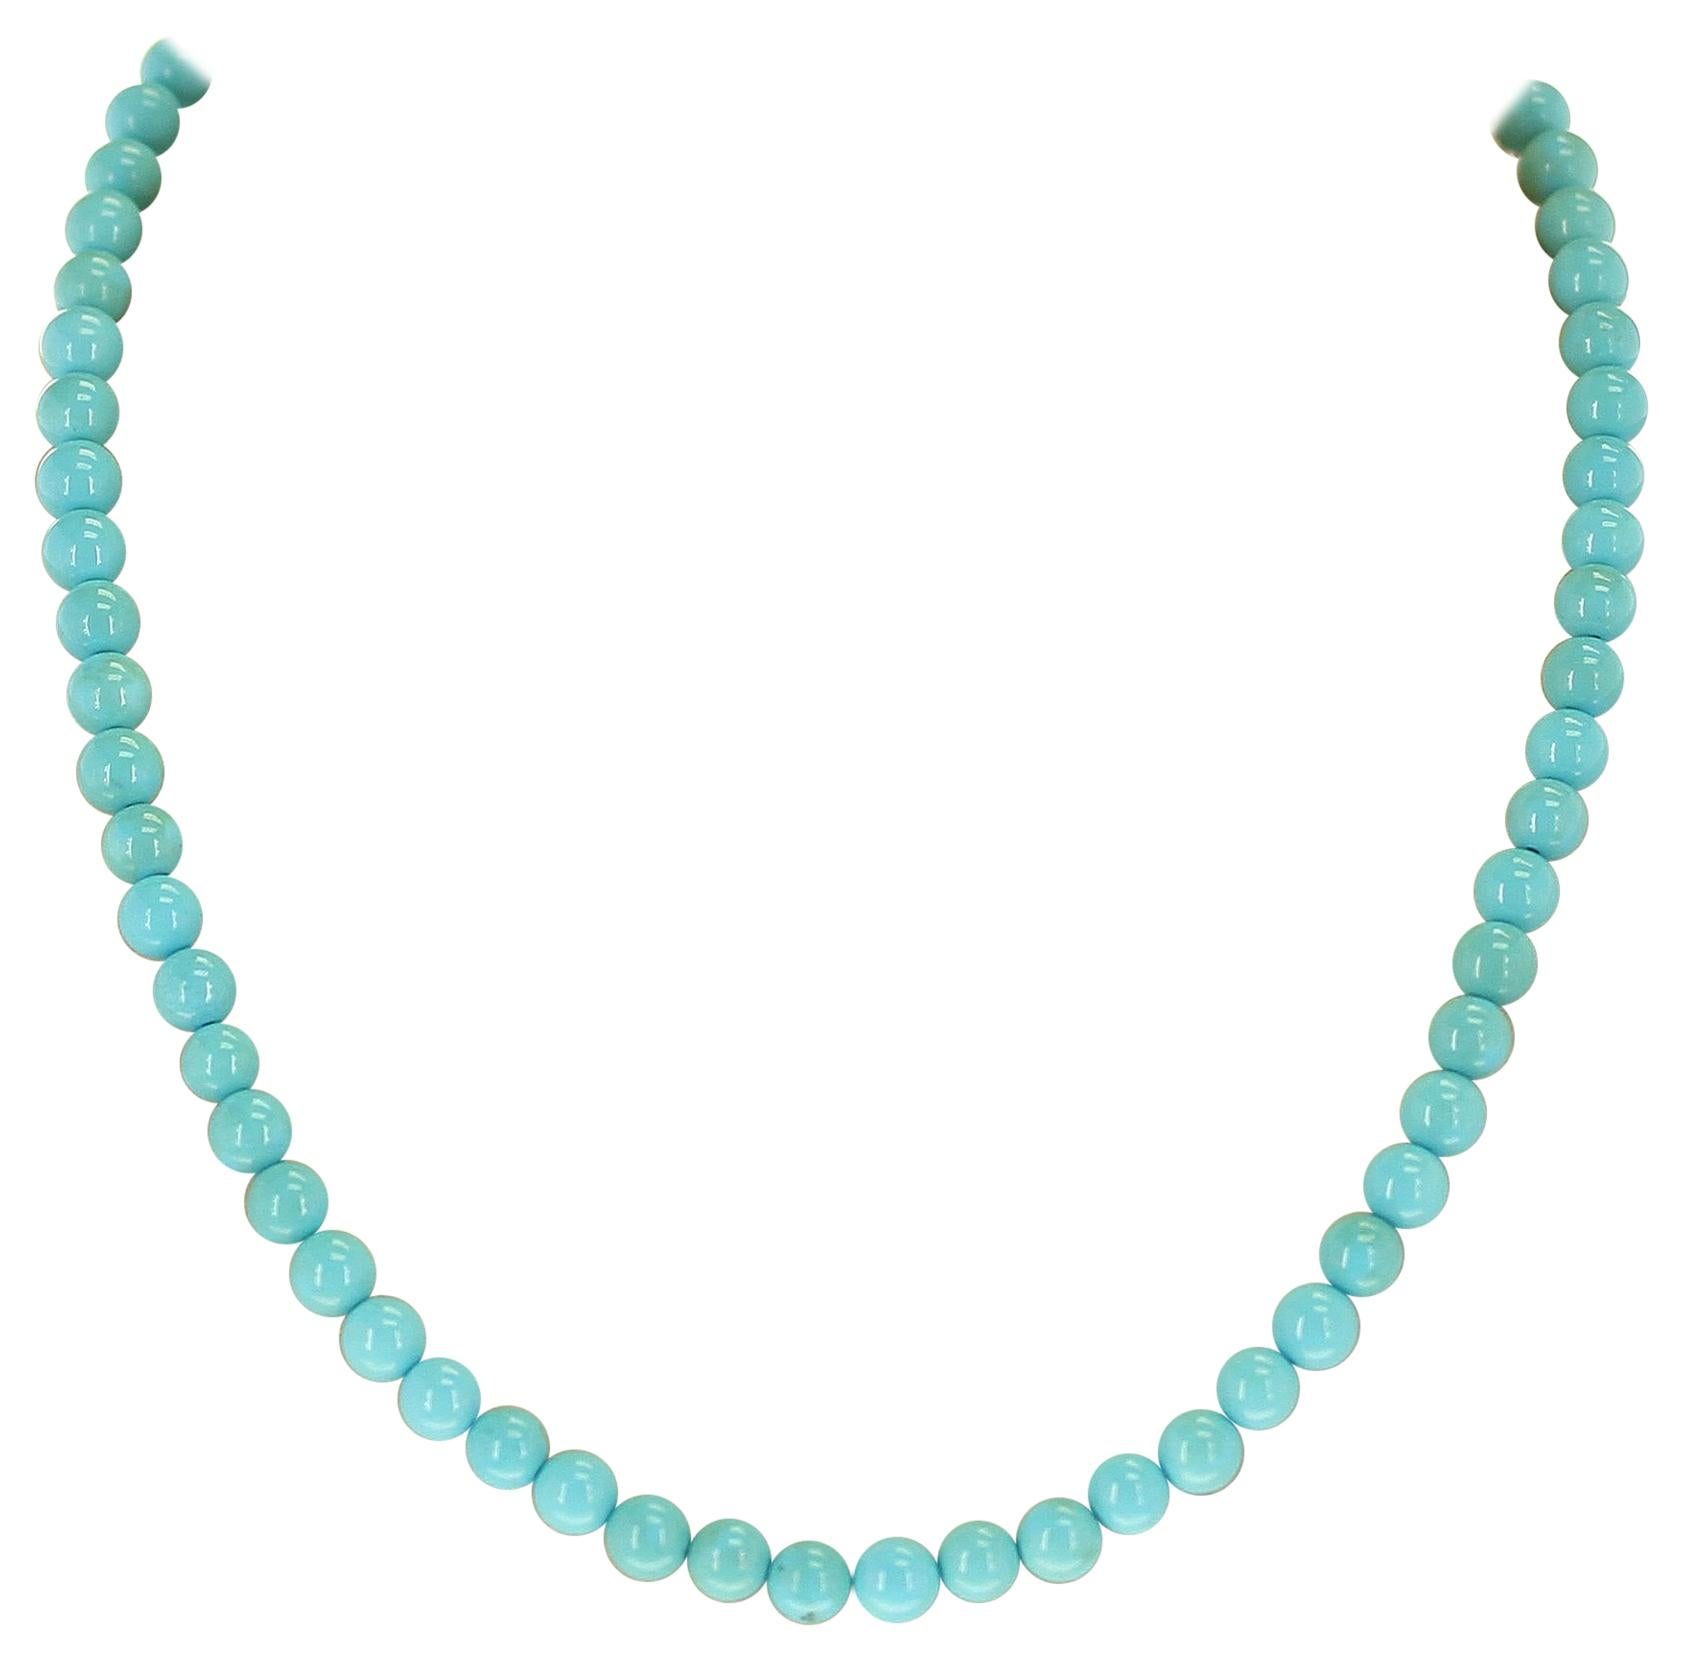 Perles turquoise rondes véritables, or jaune 14 carats